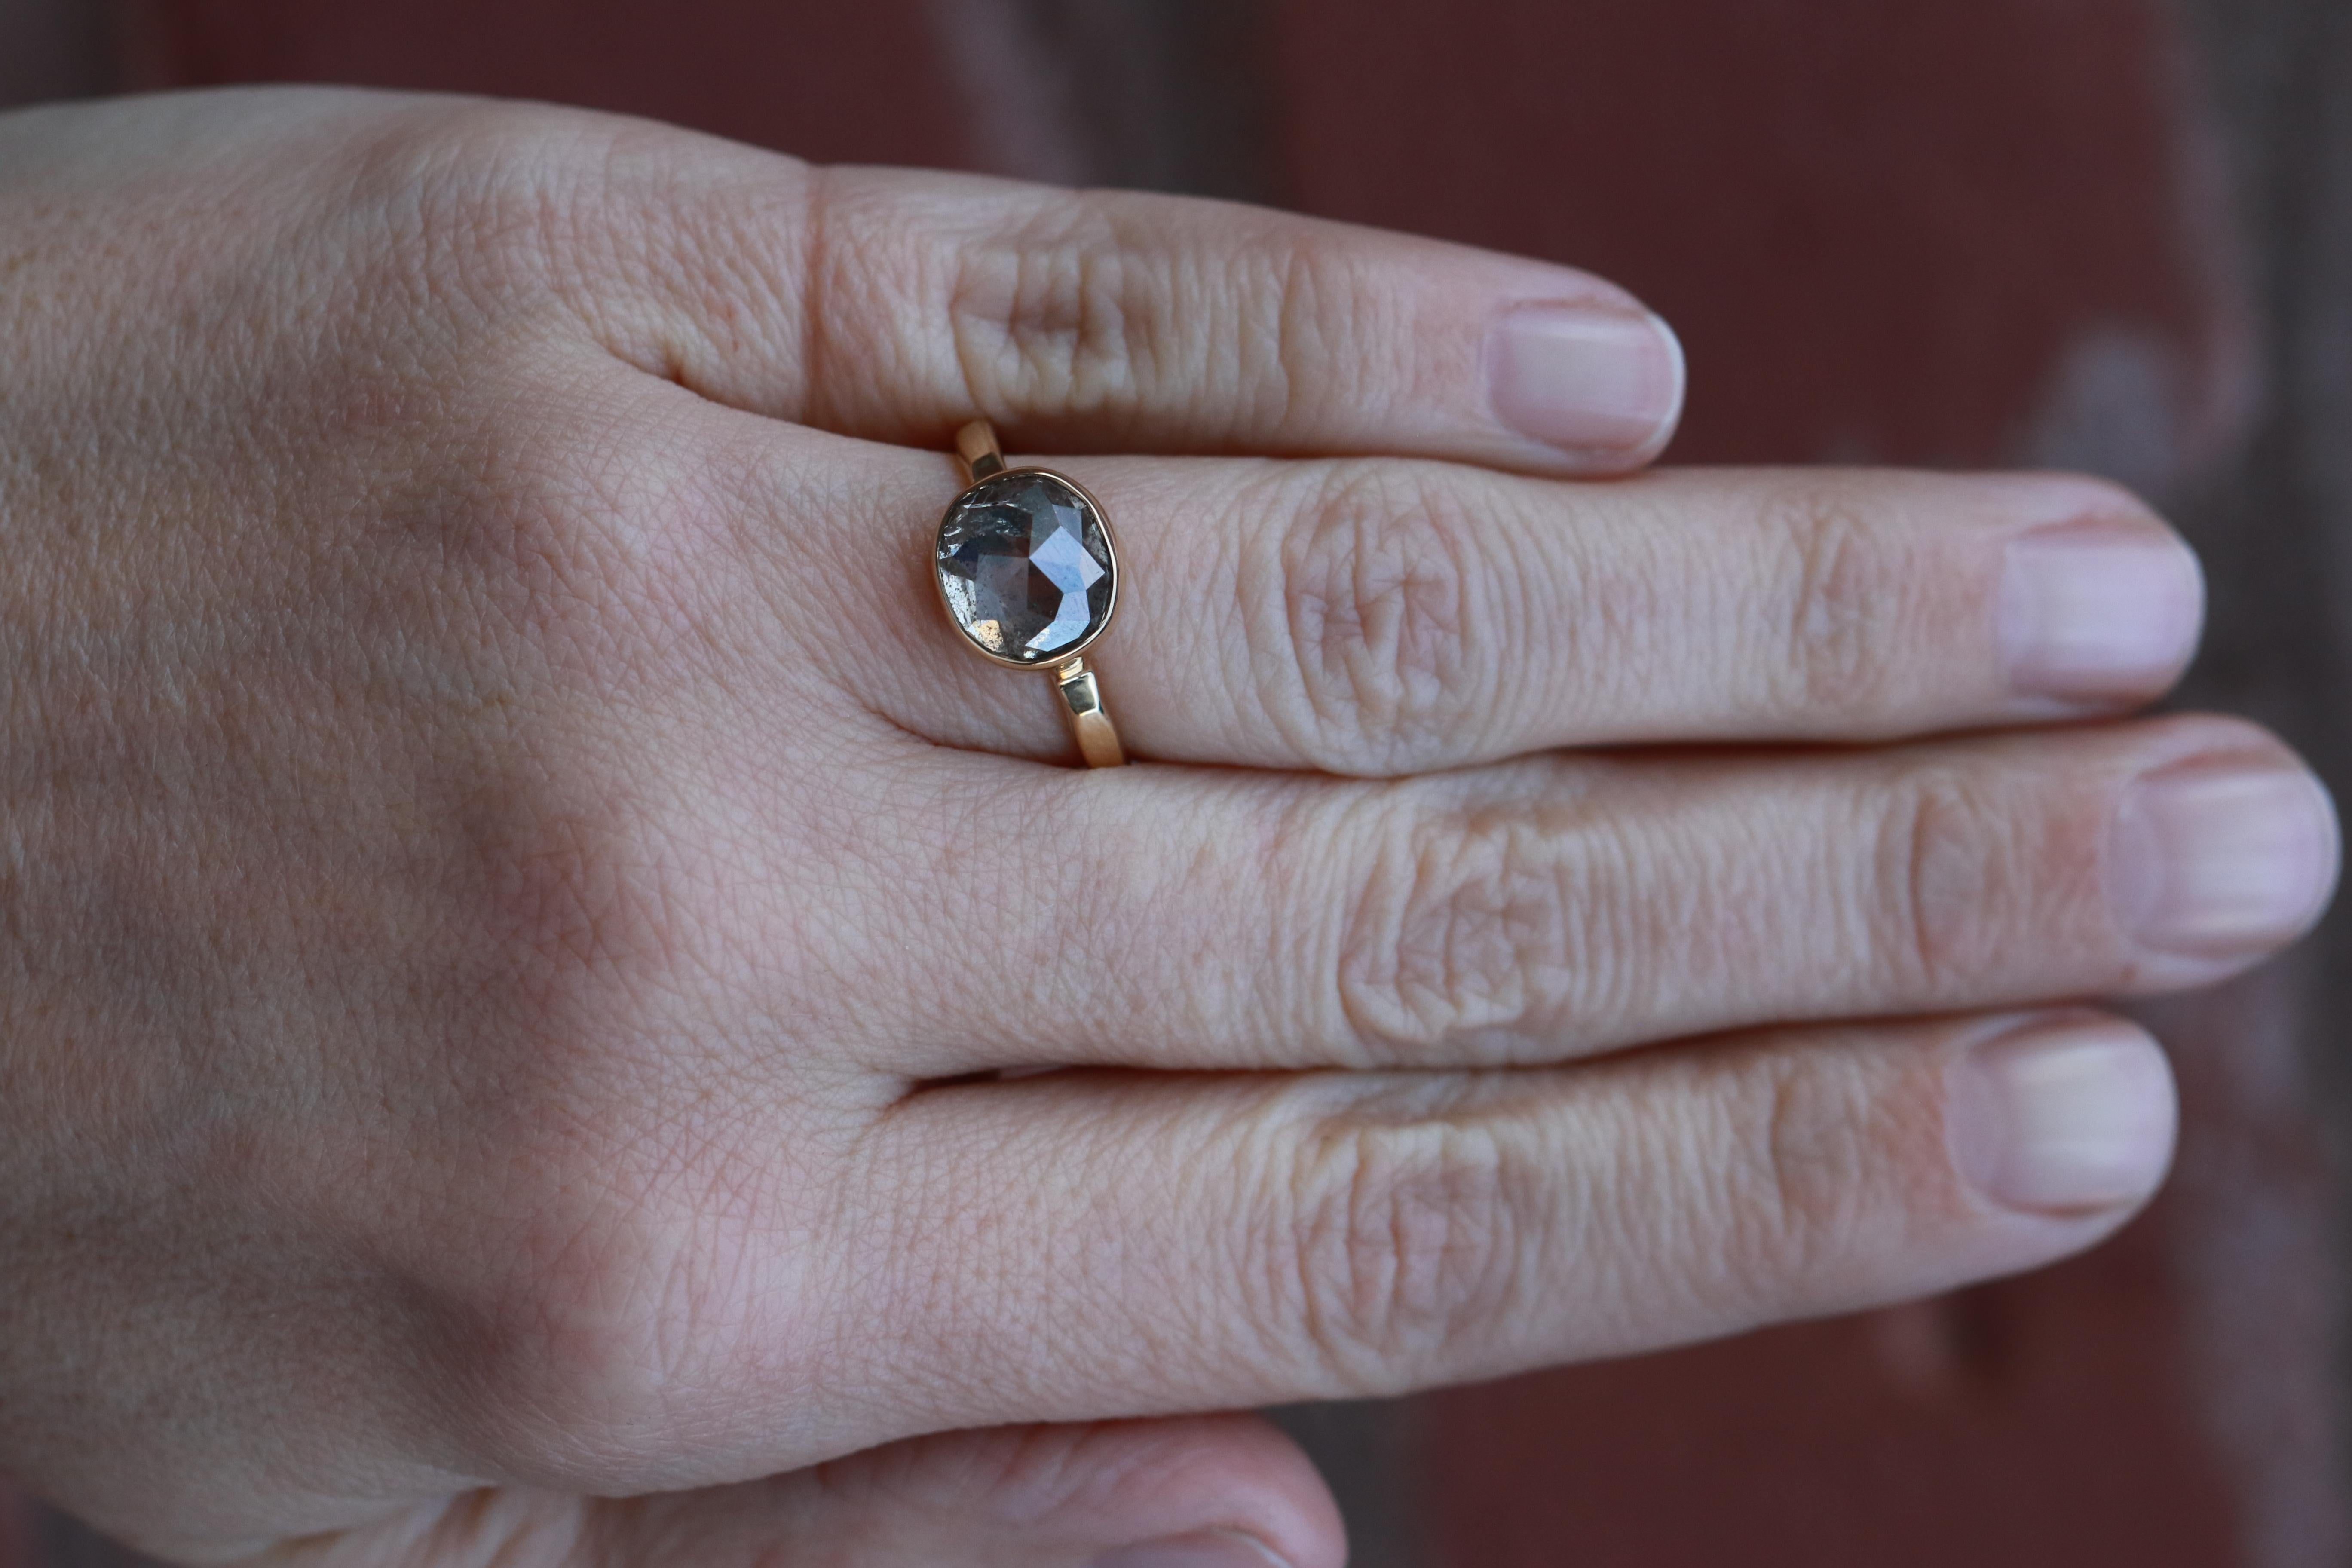 A bezel envelops a seriously sizable rustic diamond with a smoky grey salt and pepper color profile, set on a hammered gold band.

Recycled 18 Karat Gold
Oval Rosecut Diamond, 4.82ct, salt + pepper, 9.8x8.9x5.9mm
One of a Kind Piece